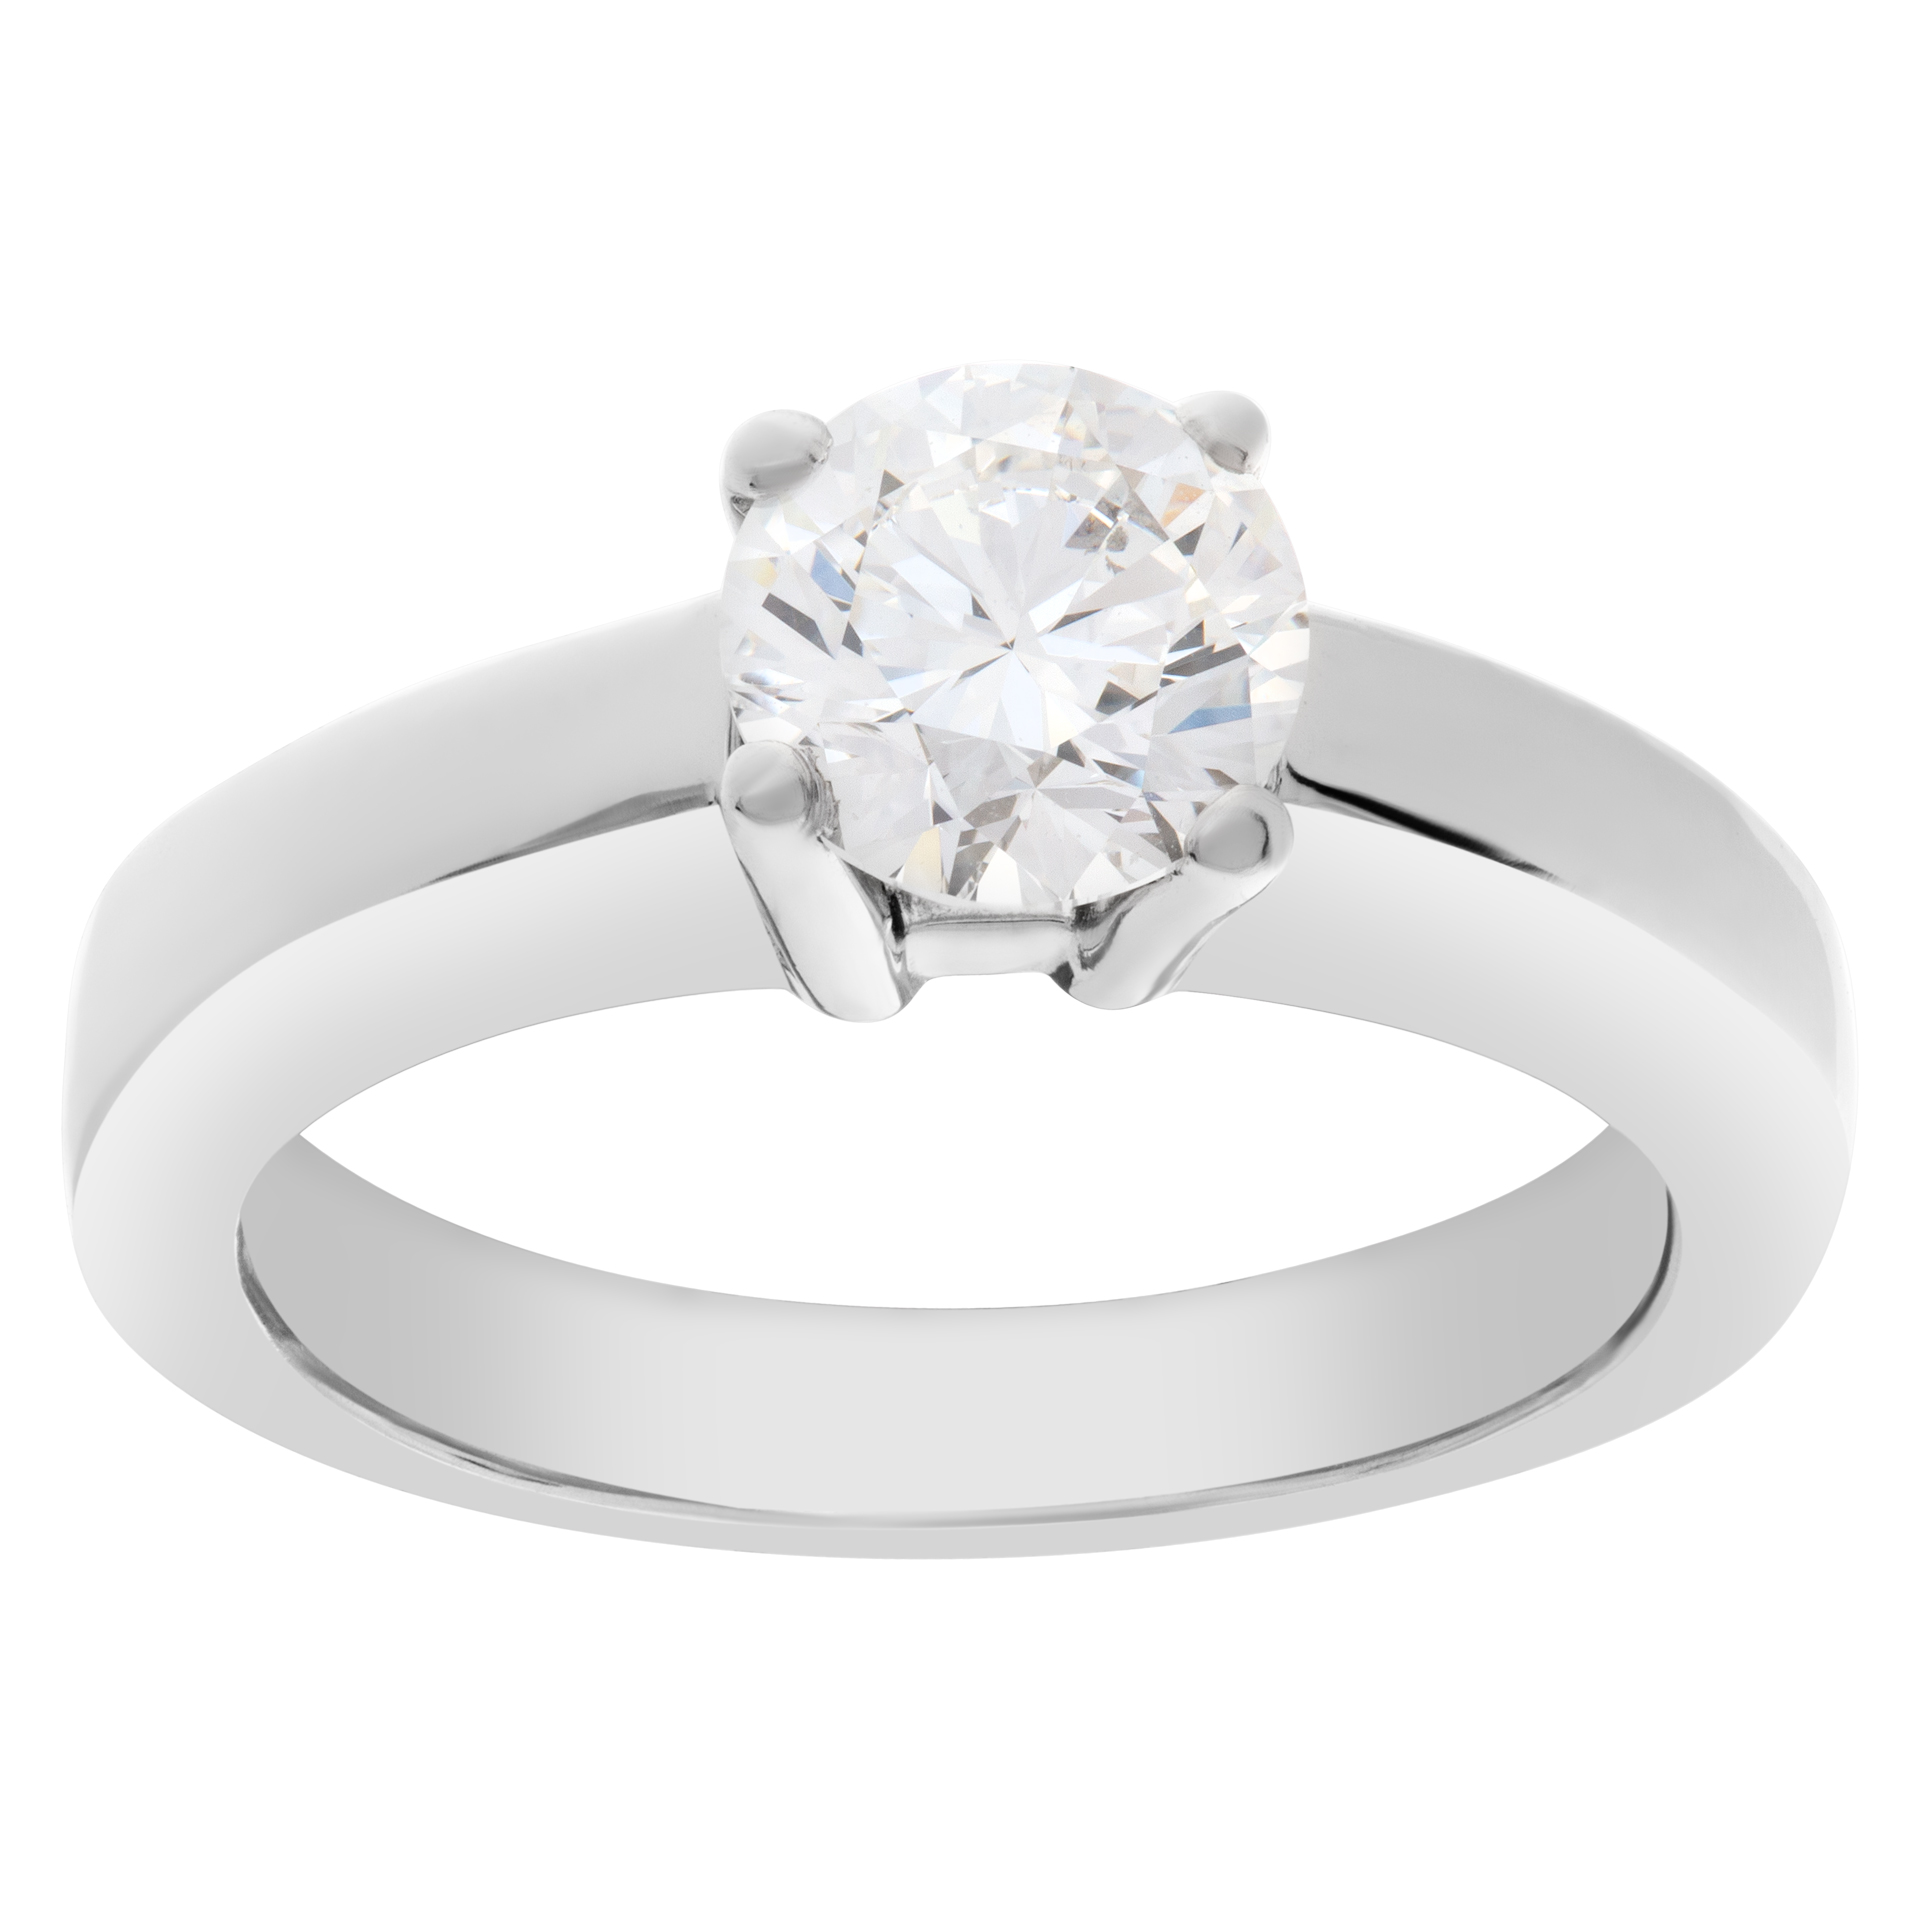 GIA Certified Diamond 1 ct (E color, VVS2 clarity) ring set in platinum. Size 5.25 image 1